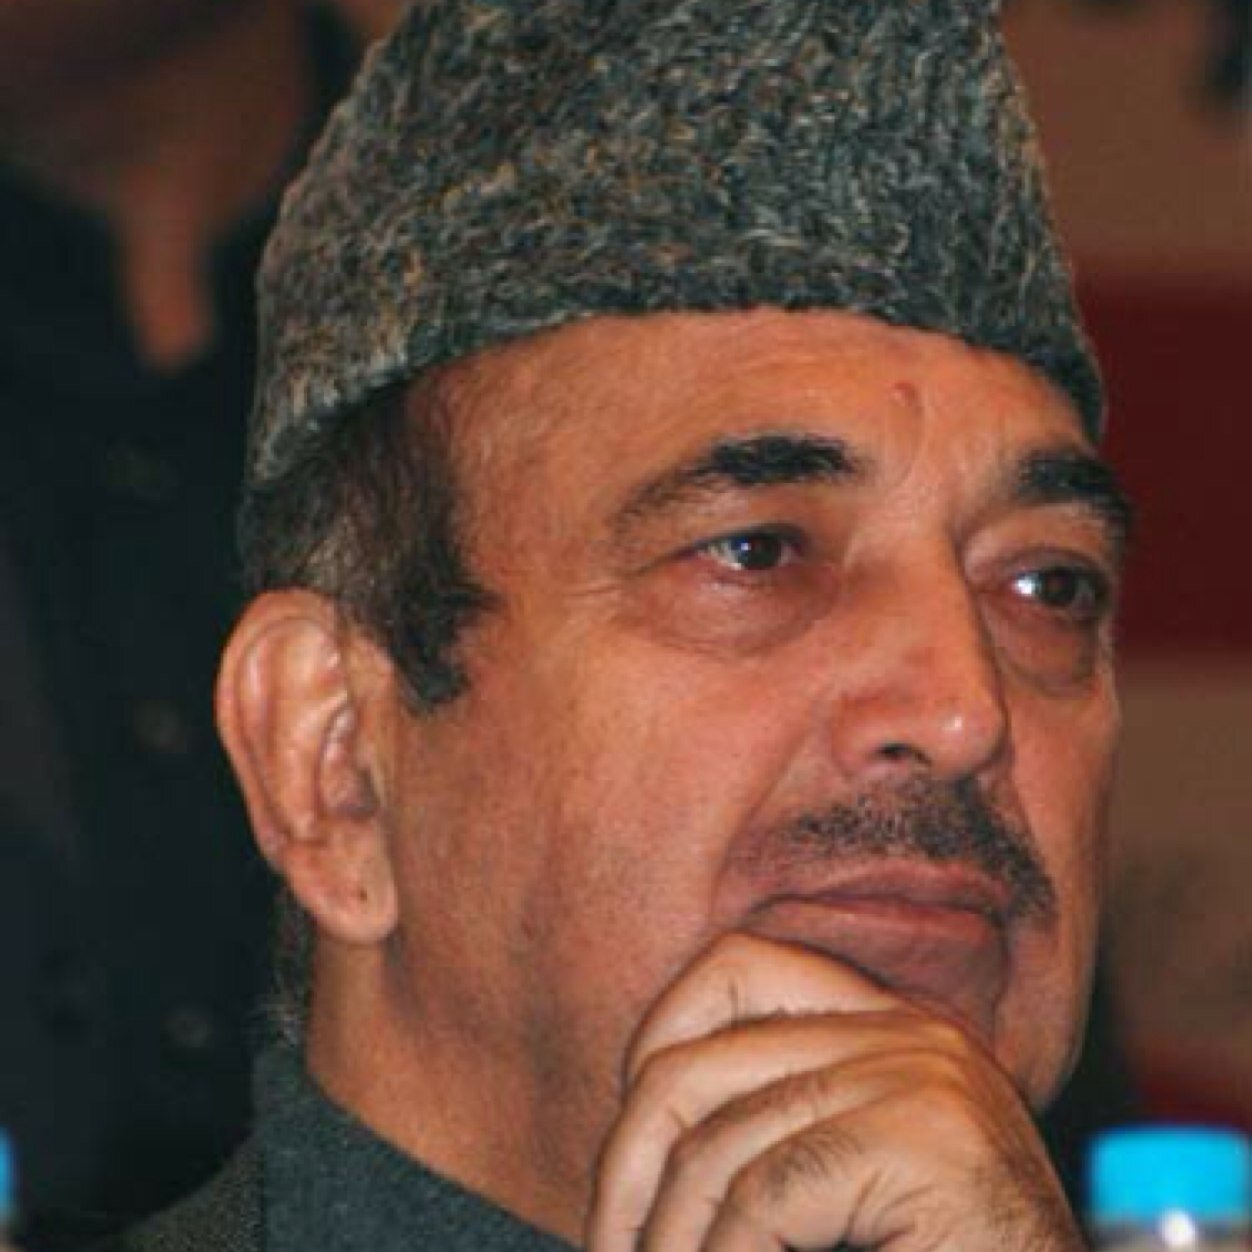 BJP's 'mission 44 plus' in J&K a daydream: Azad